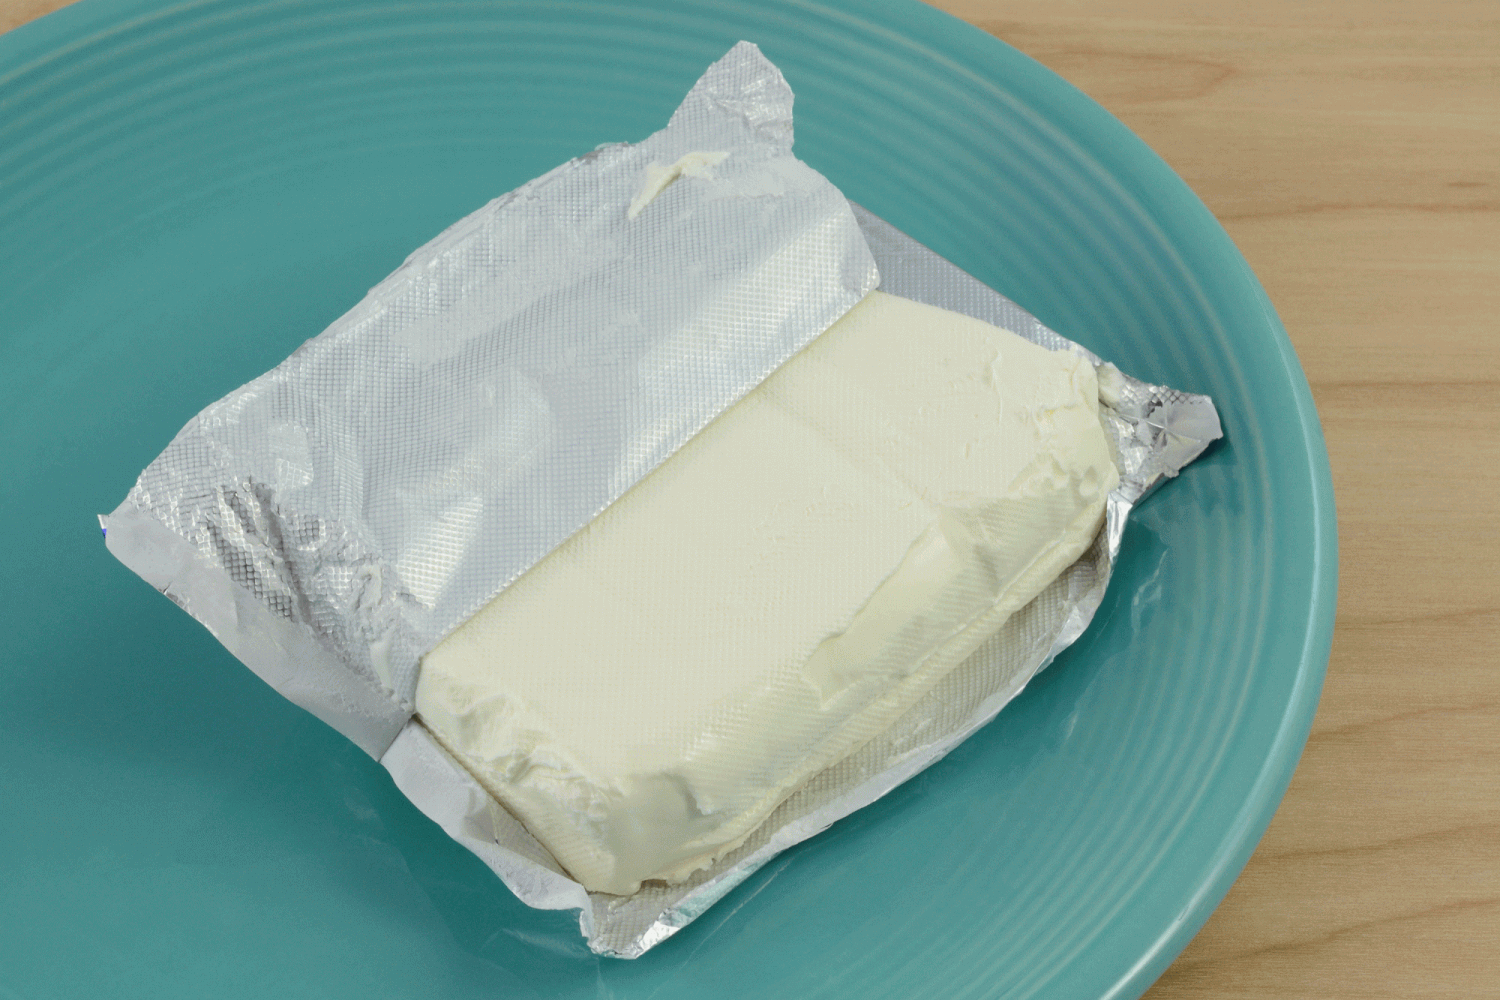 Block of cream cheese on blue plate